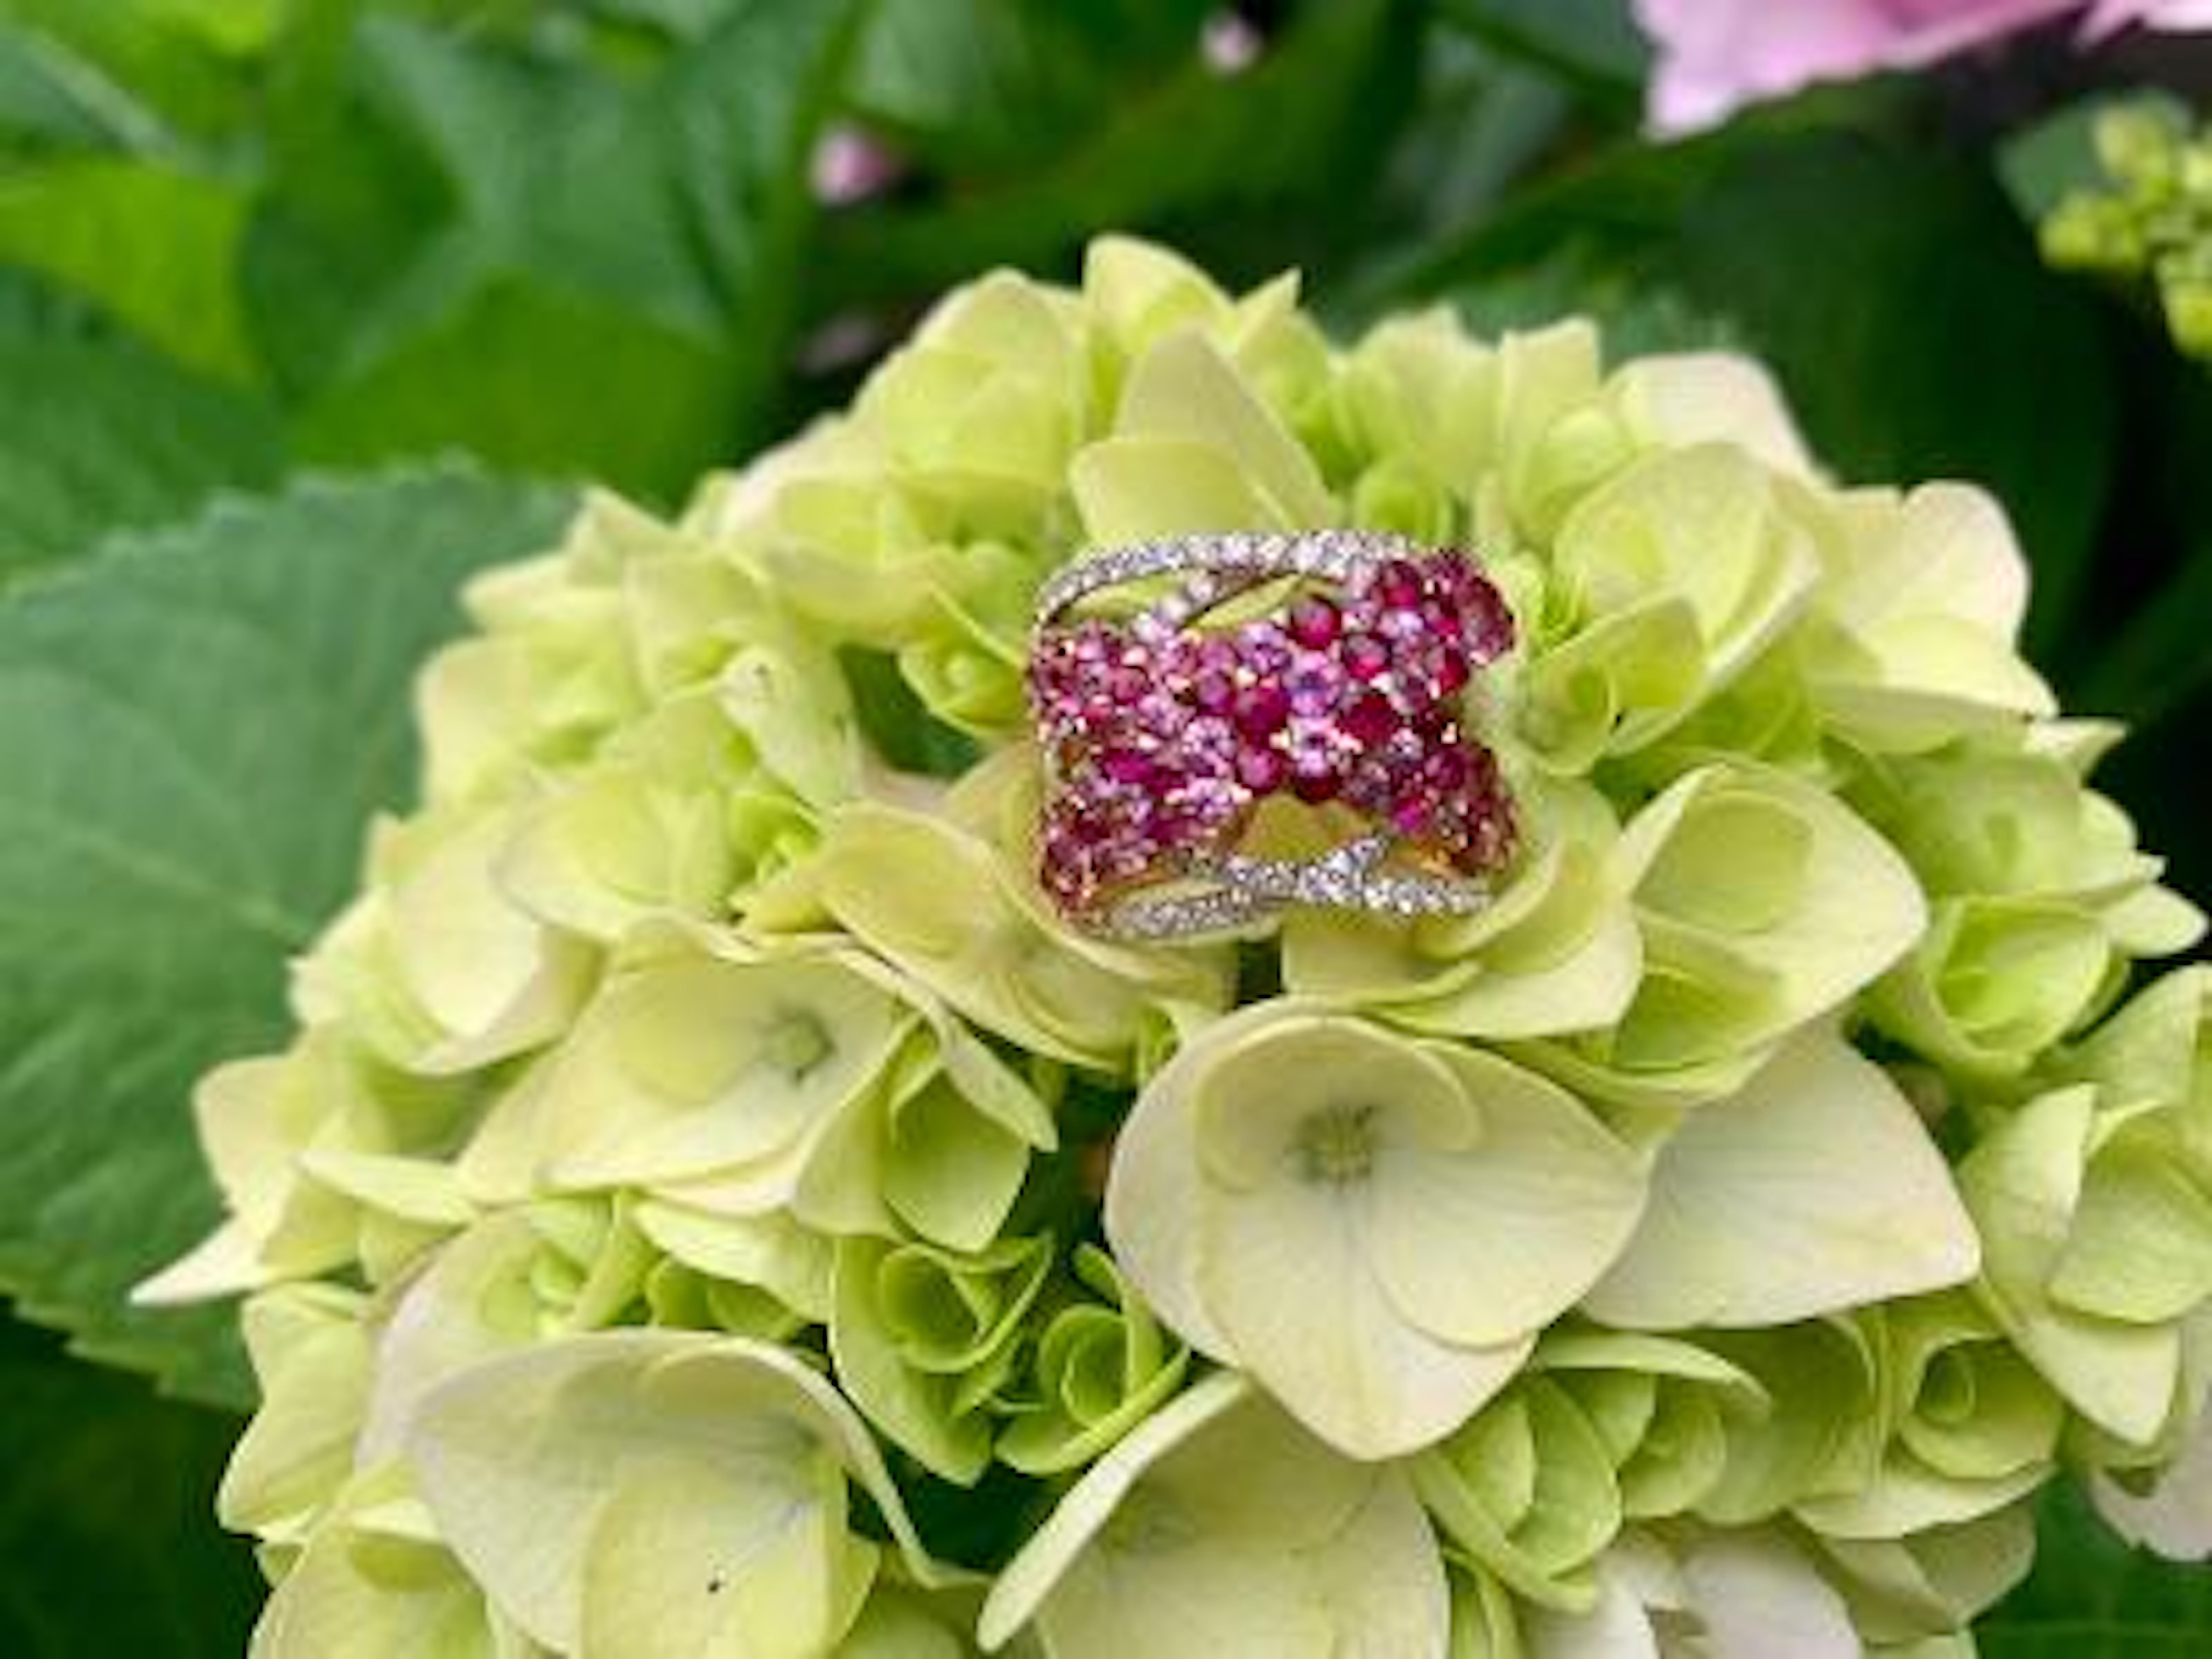 Striking and beautiful custom made 18 Karat rose gold band ring features the most vivid and sparkling rubies, pink sapphires and diamonds in an 